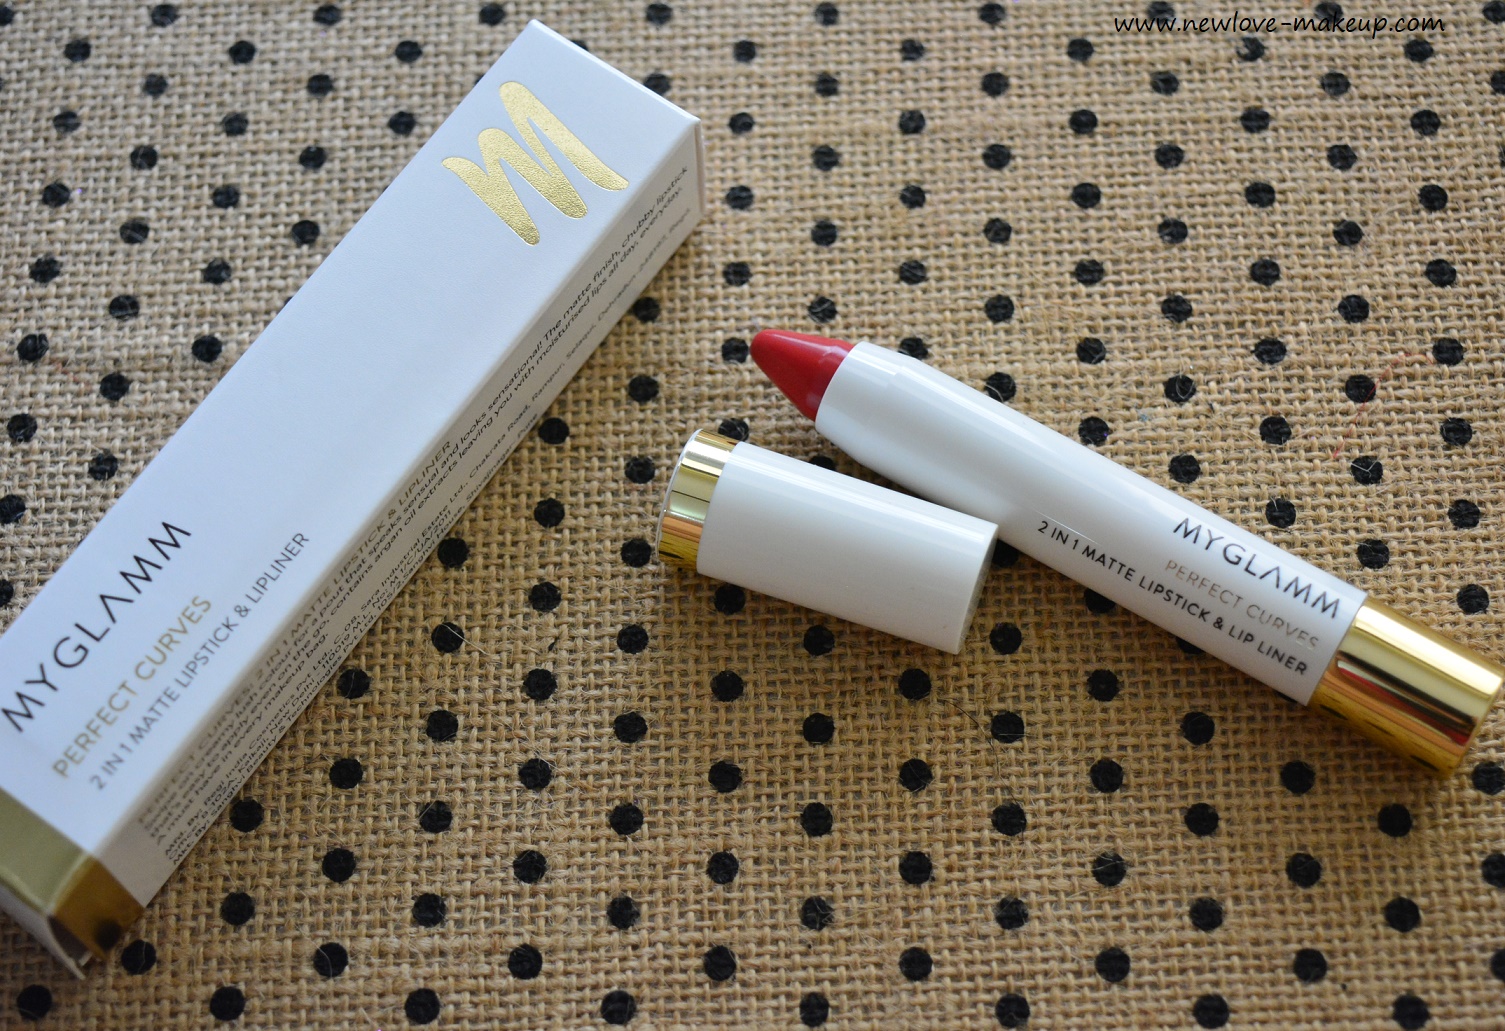 MyGlamm Makeup Products Review & Demo